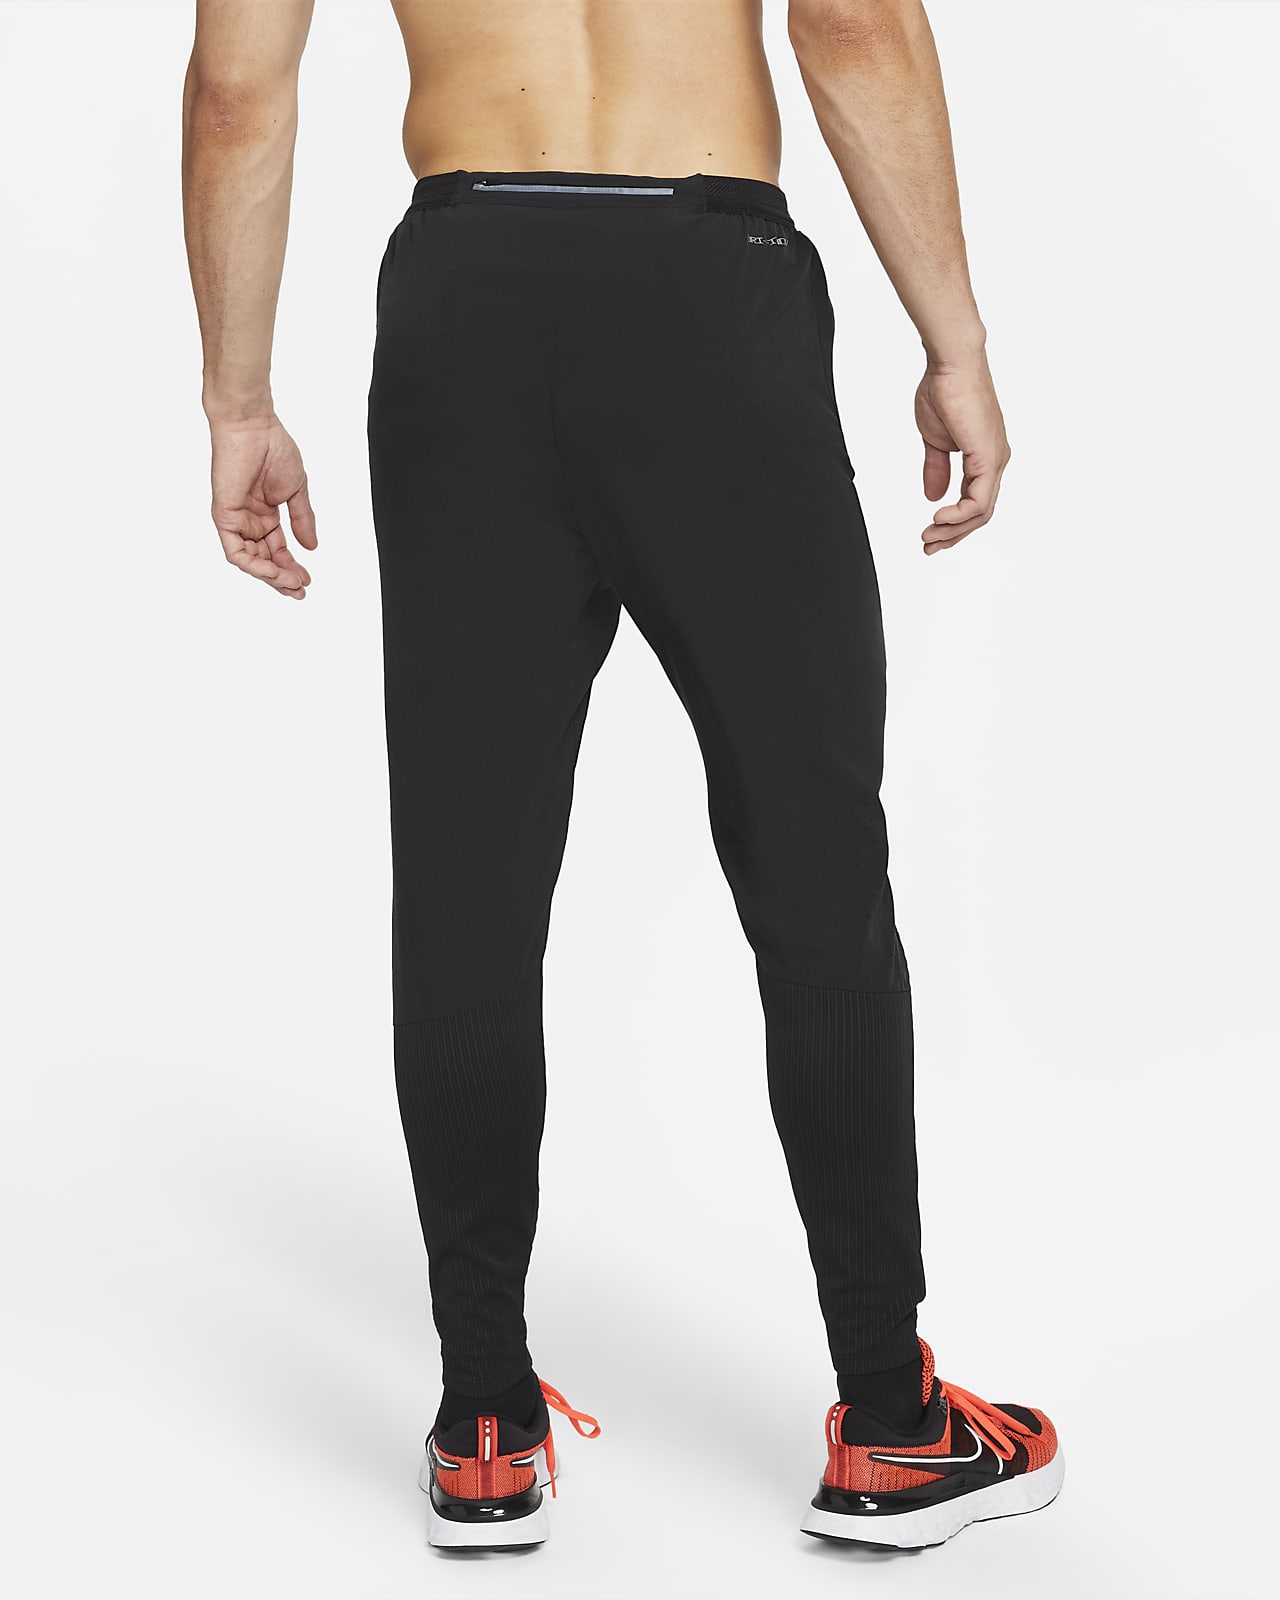 Nike Dri-FIT Challenger Men's Knit Running Trousers. Nike IN